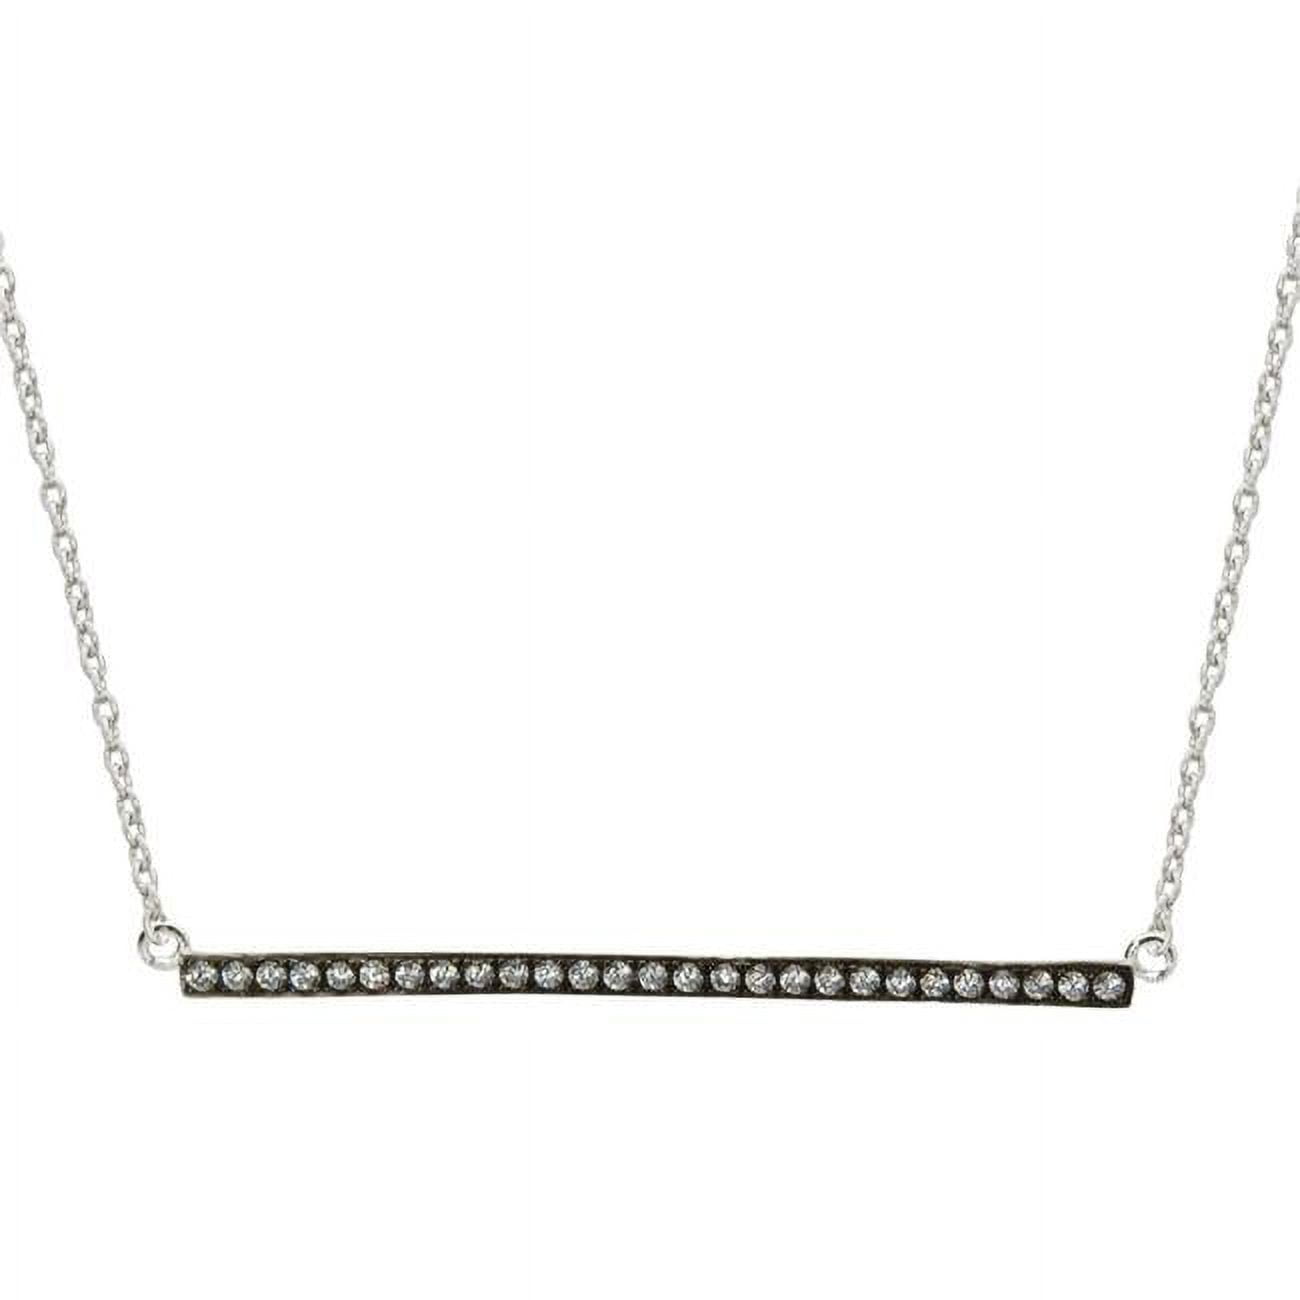 Je1129s 16 & 1 In. Mini Sterling Silver Sideways Charcoal Bar Pendant Cubic Zirconia Stone Necklace